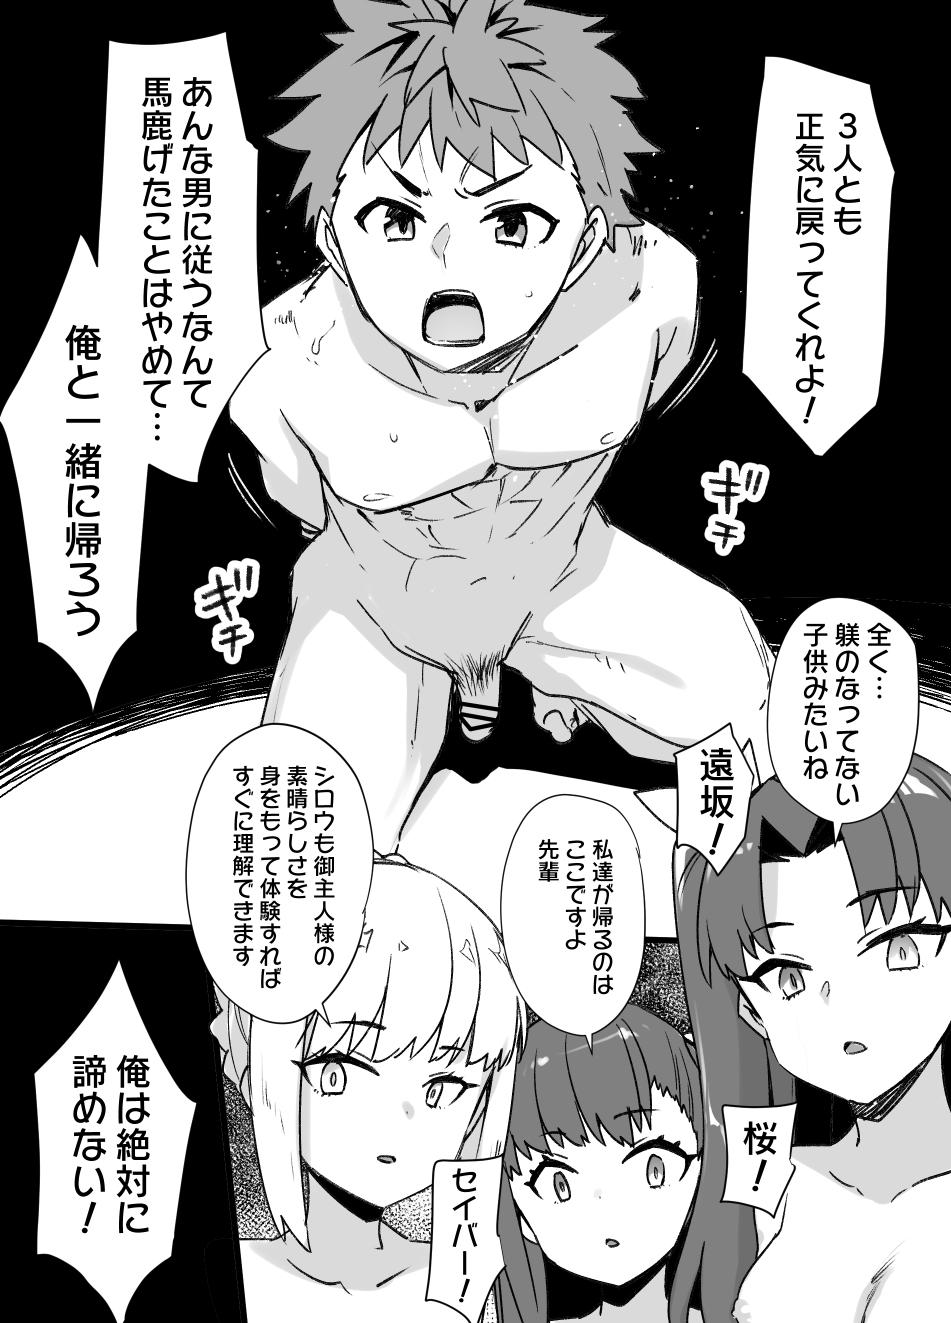 Playing A manga about Shirou Emiya who went to save Rin Tohsaka from captivity and is transformed into a female slave through physical feminization and brainwashing[Fate/ stay night) - Fate stay night Thailand - Page 7